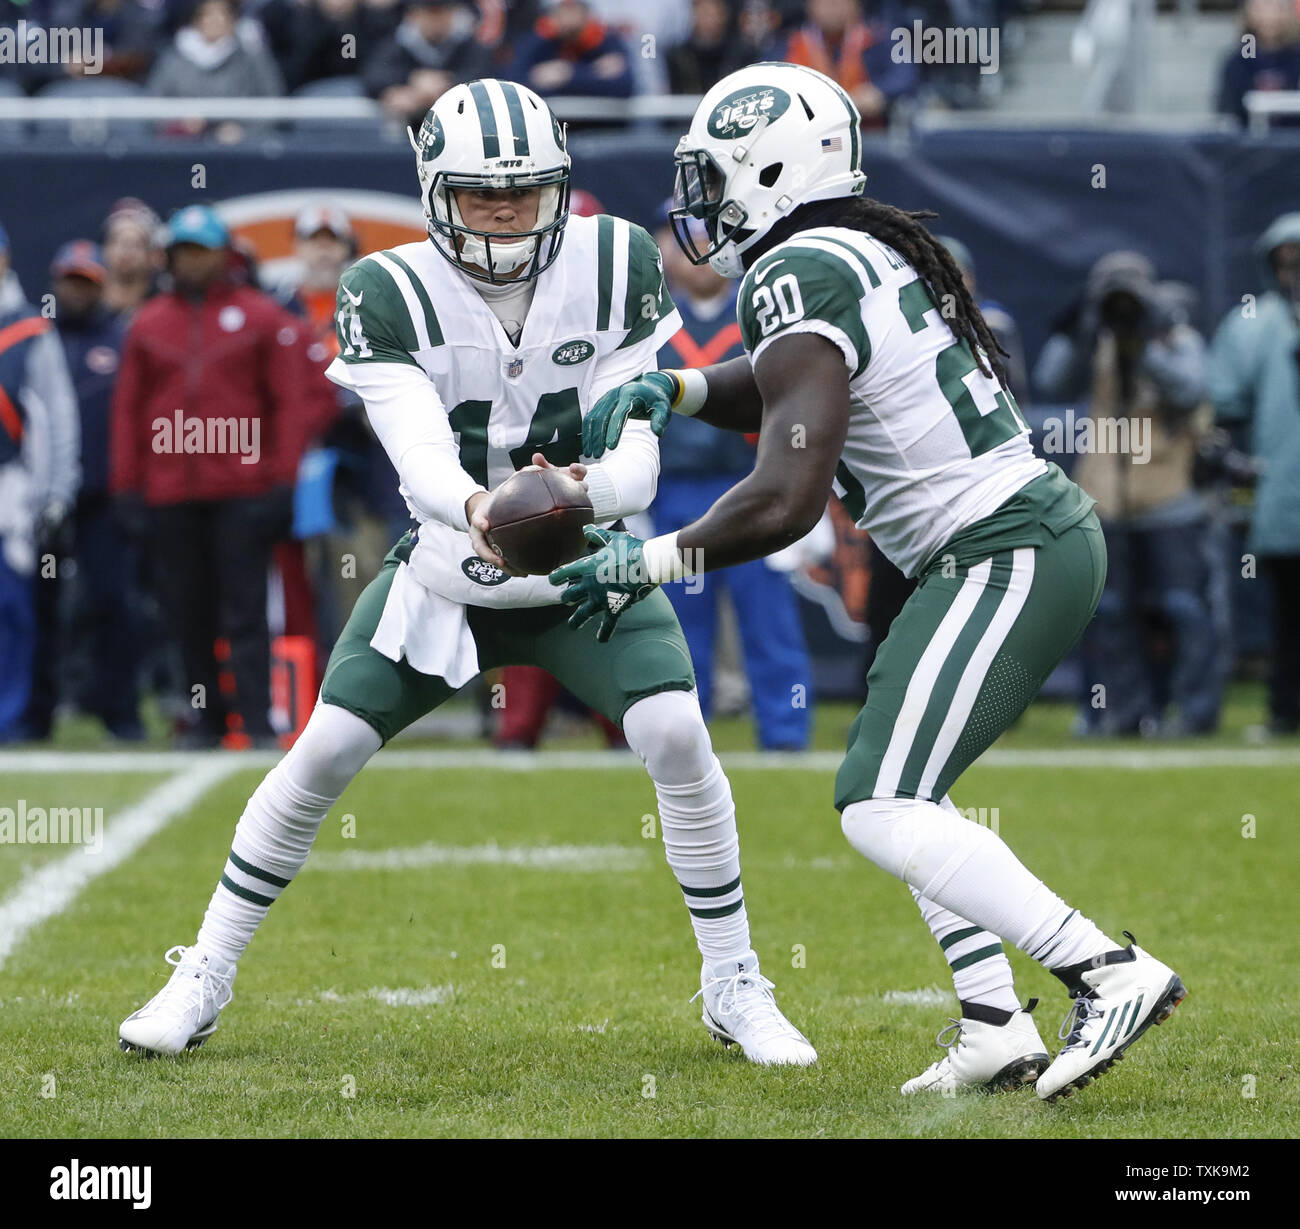 New York Jets quarterback Sam Darnold (14) passes the ball to running back Isaiah Crowell (20) against the Chicago Bears during the first half at Soldier Field in Chicago on October 28, 2018. Photo by Kamil Krzaczynski/UPI Stock Photo